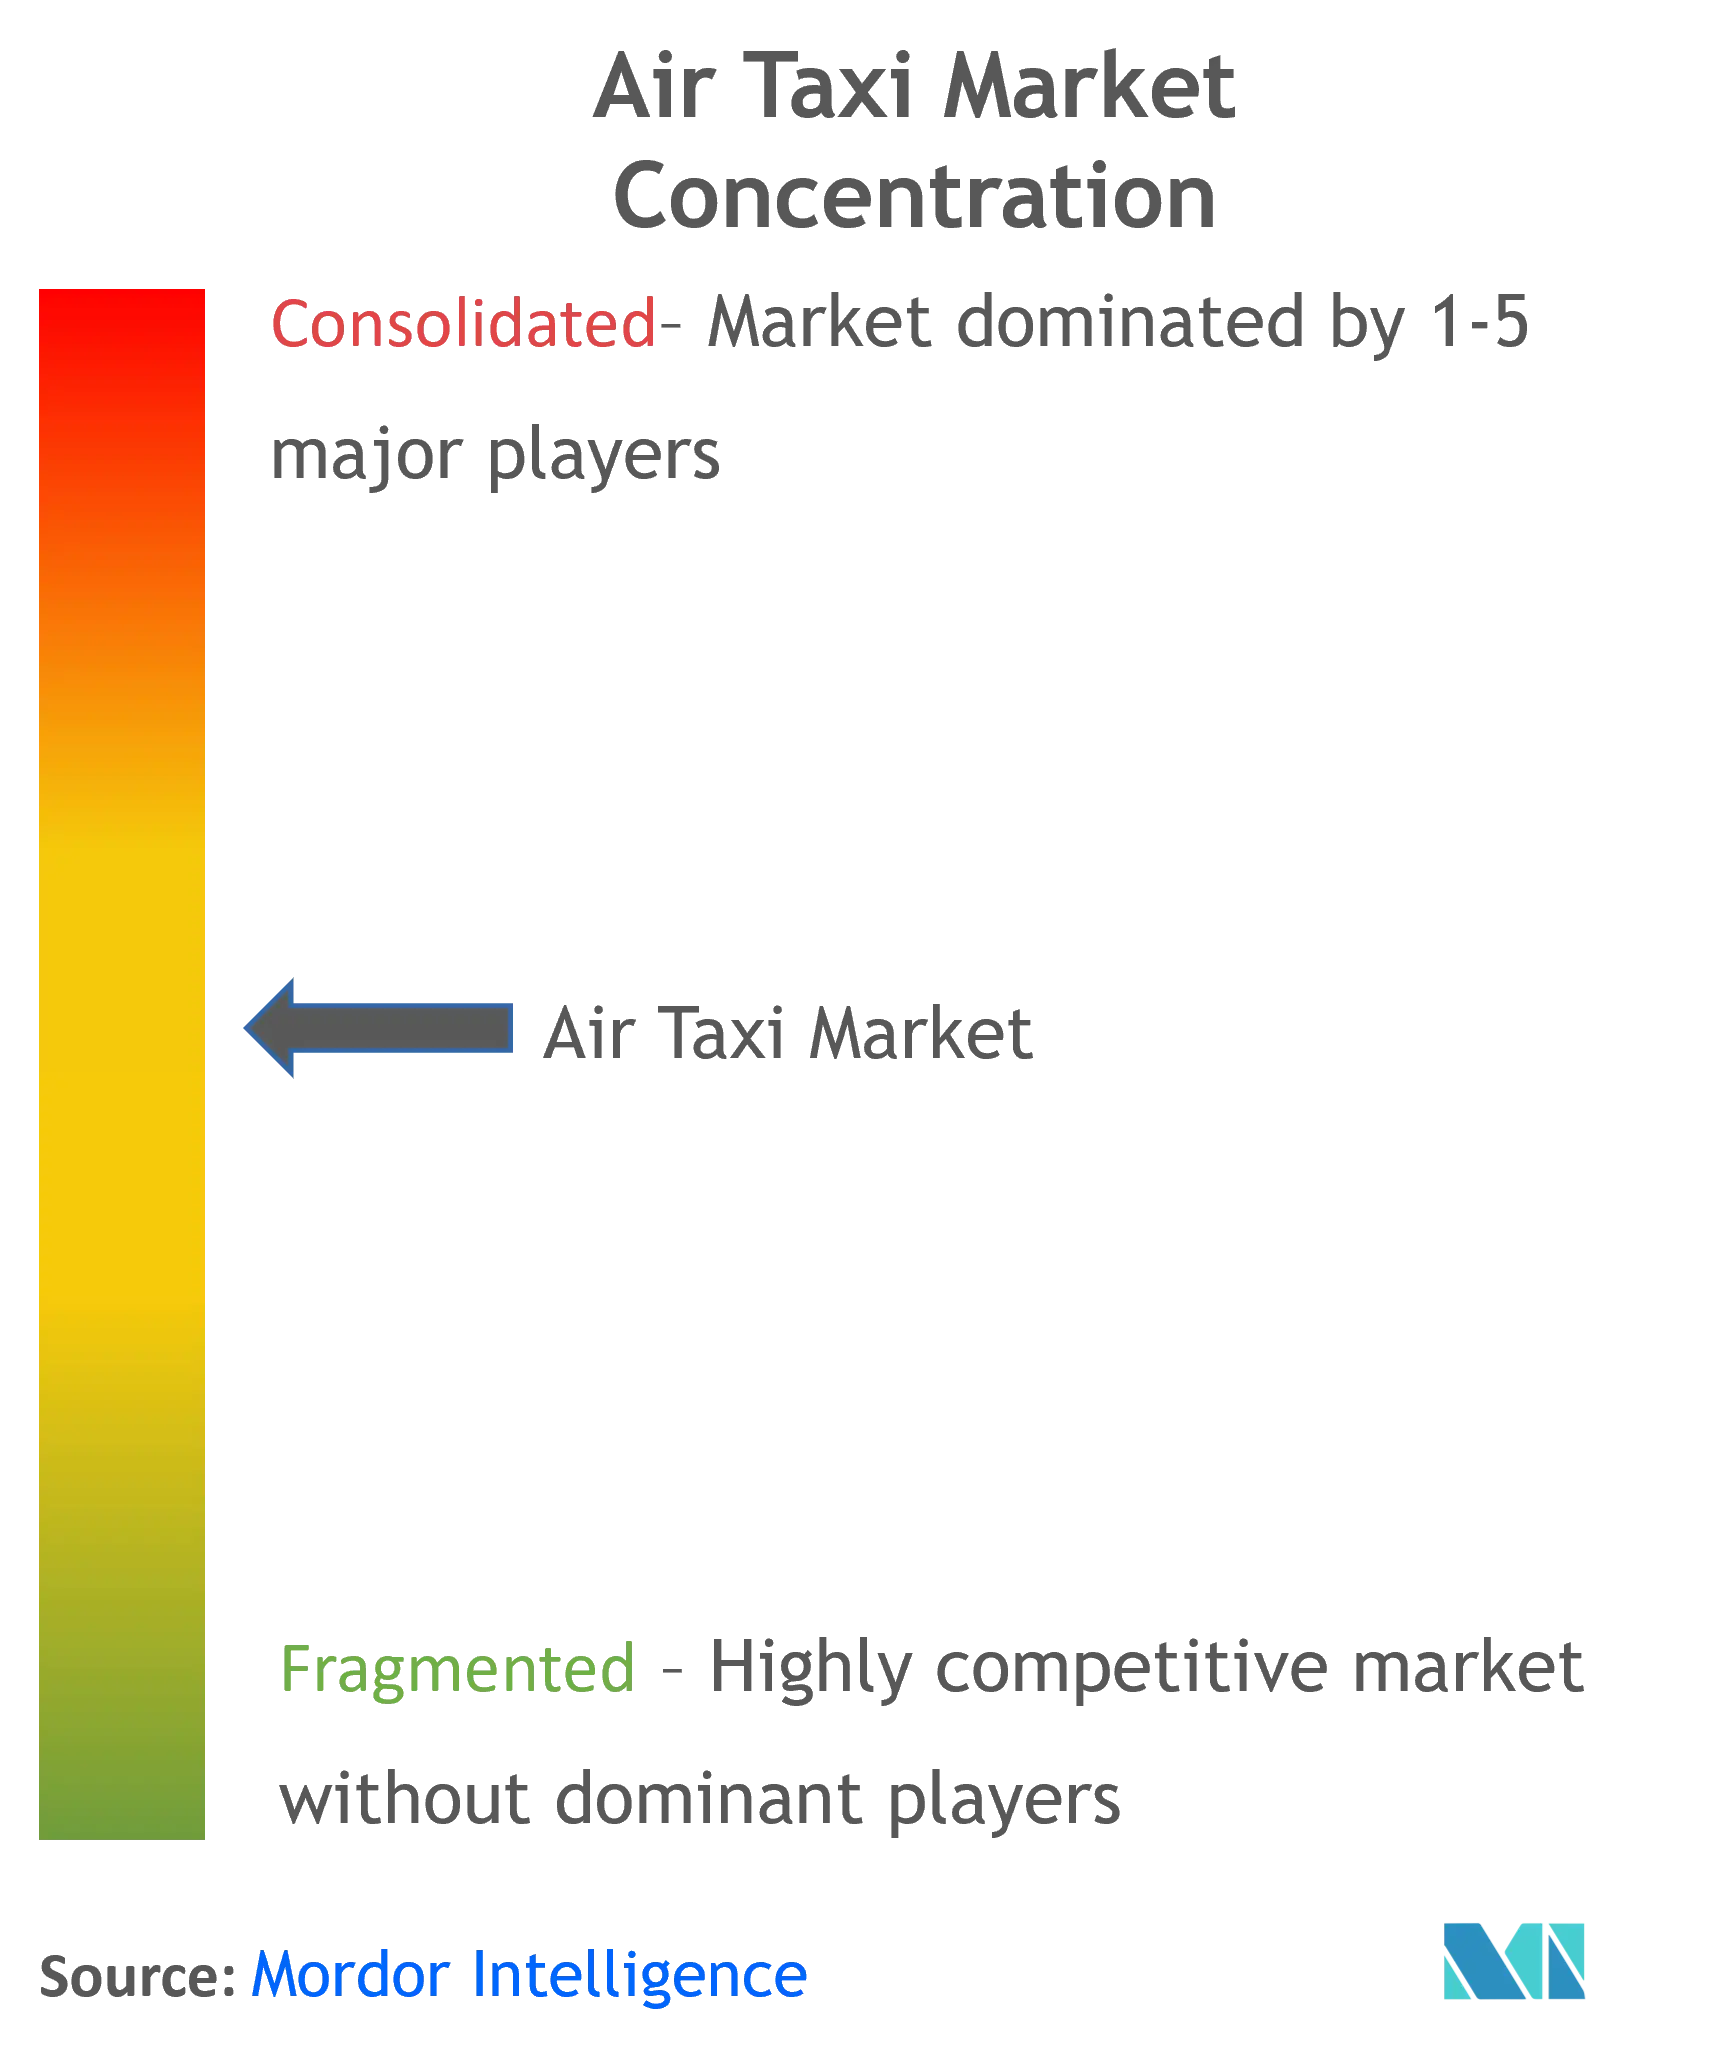 Air Taxi Market Concentration